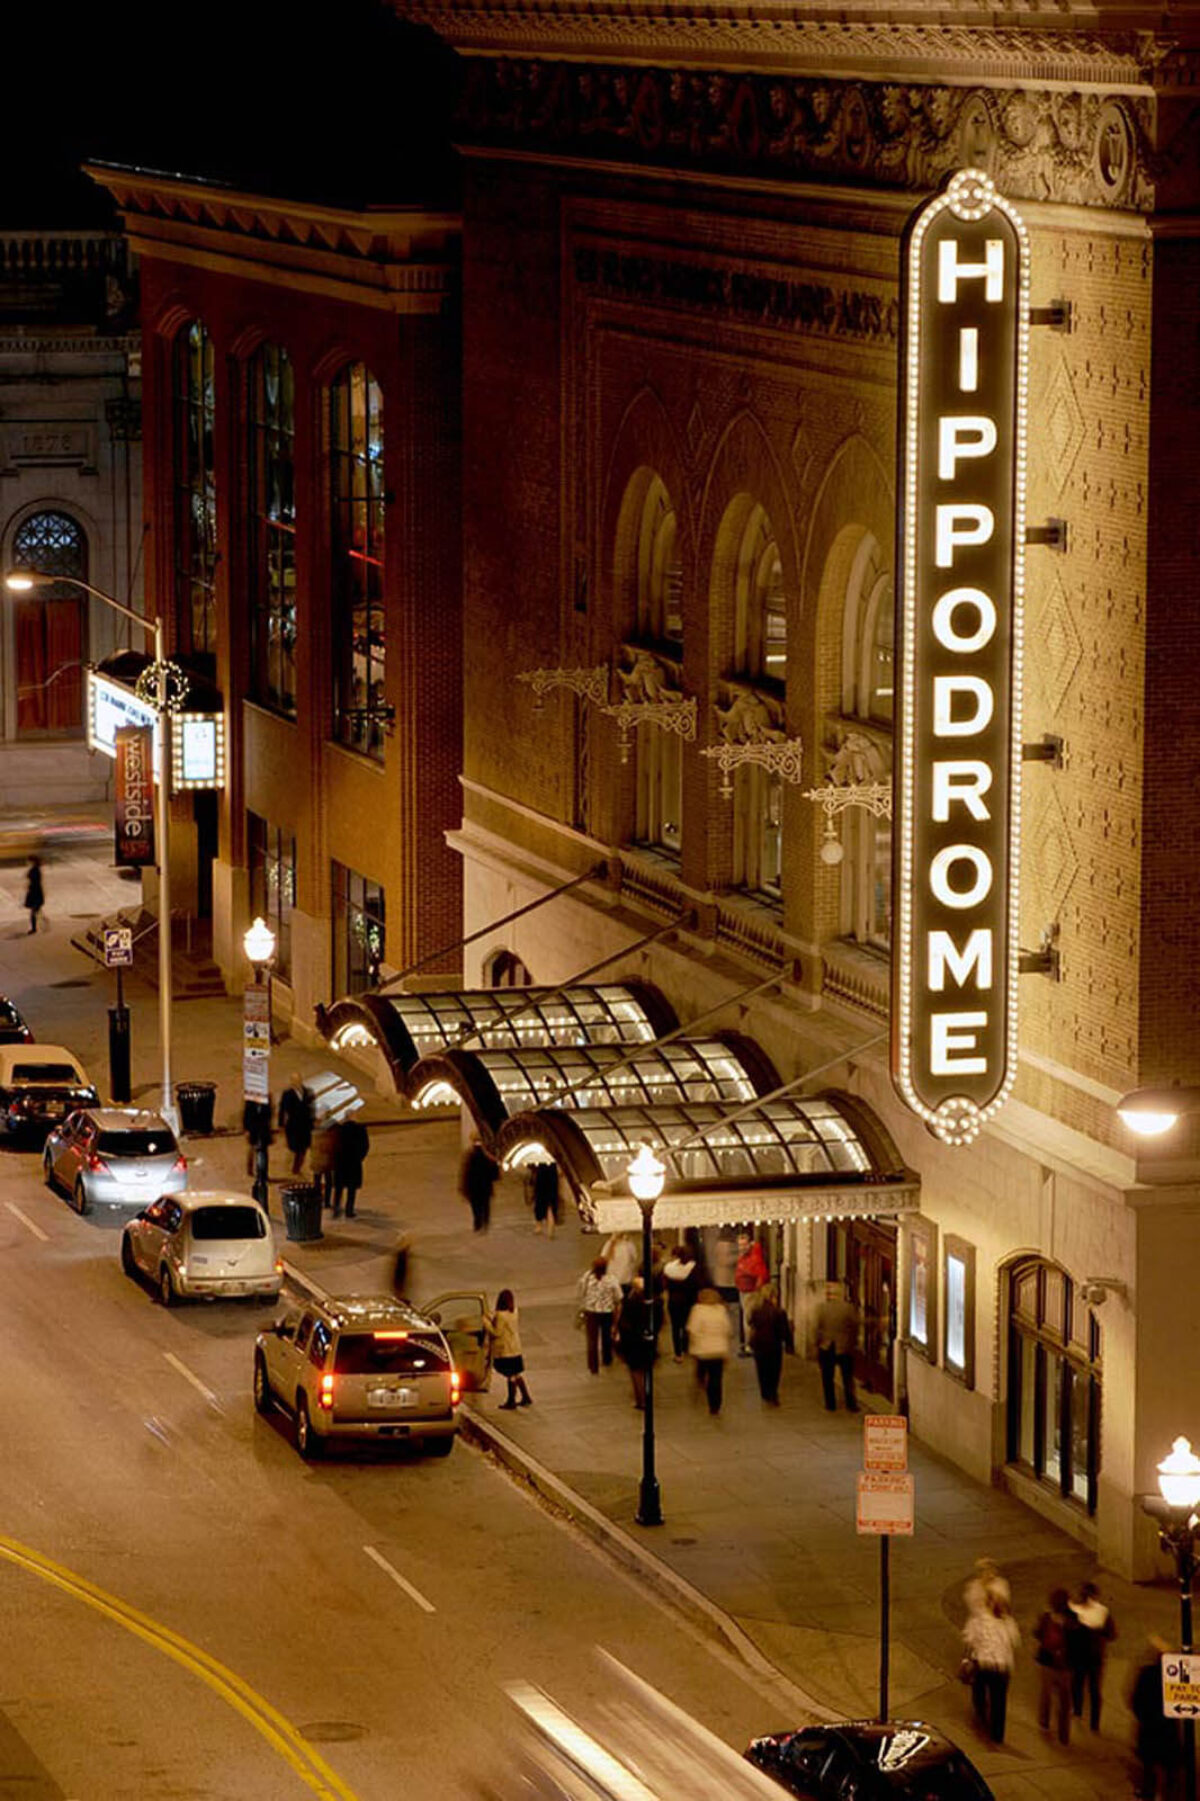 The exterior from above of The Hippodrome's sign in Baltimore at night.